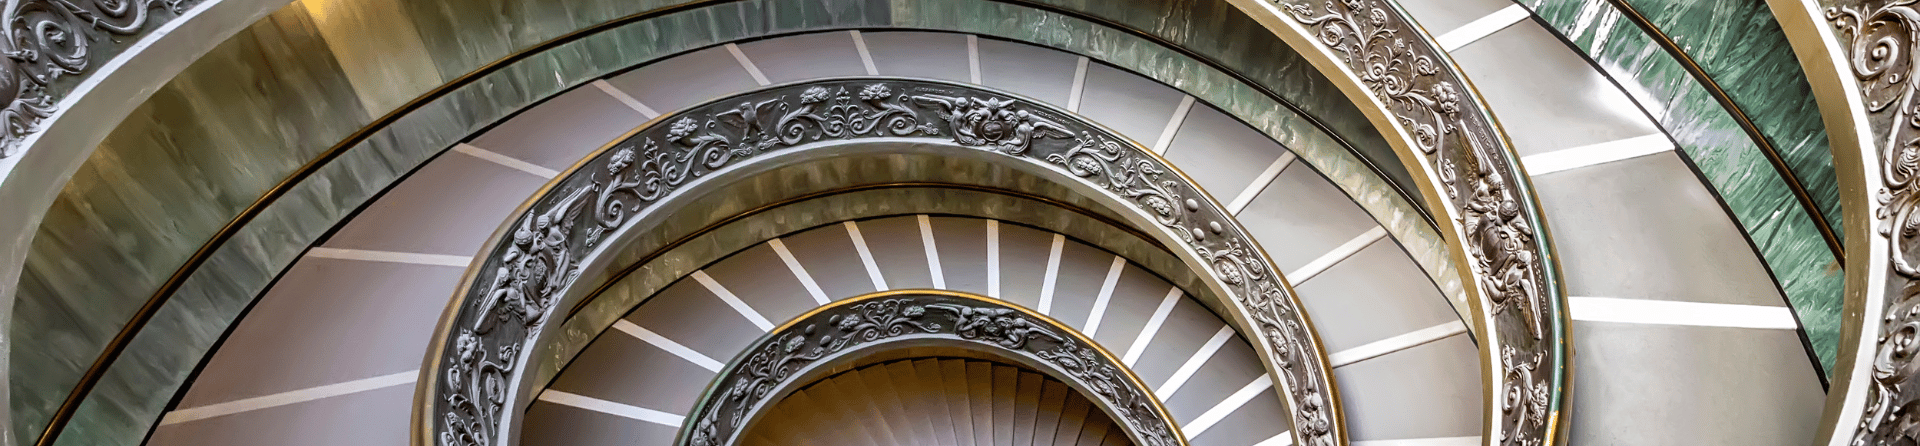 What is special about the Bramante Staircase?